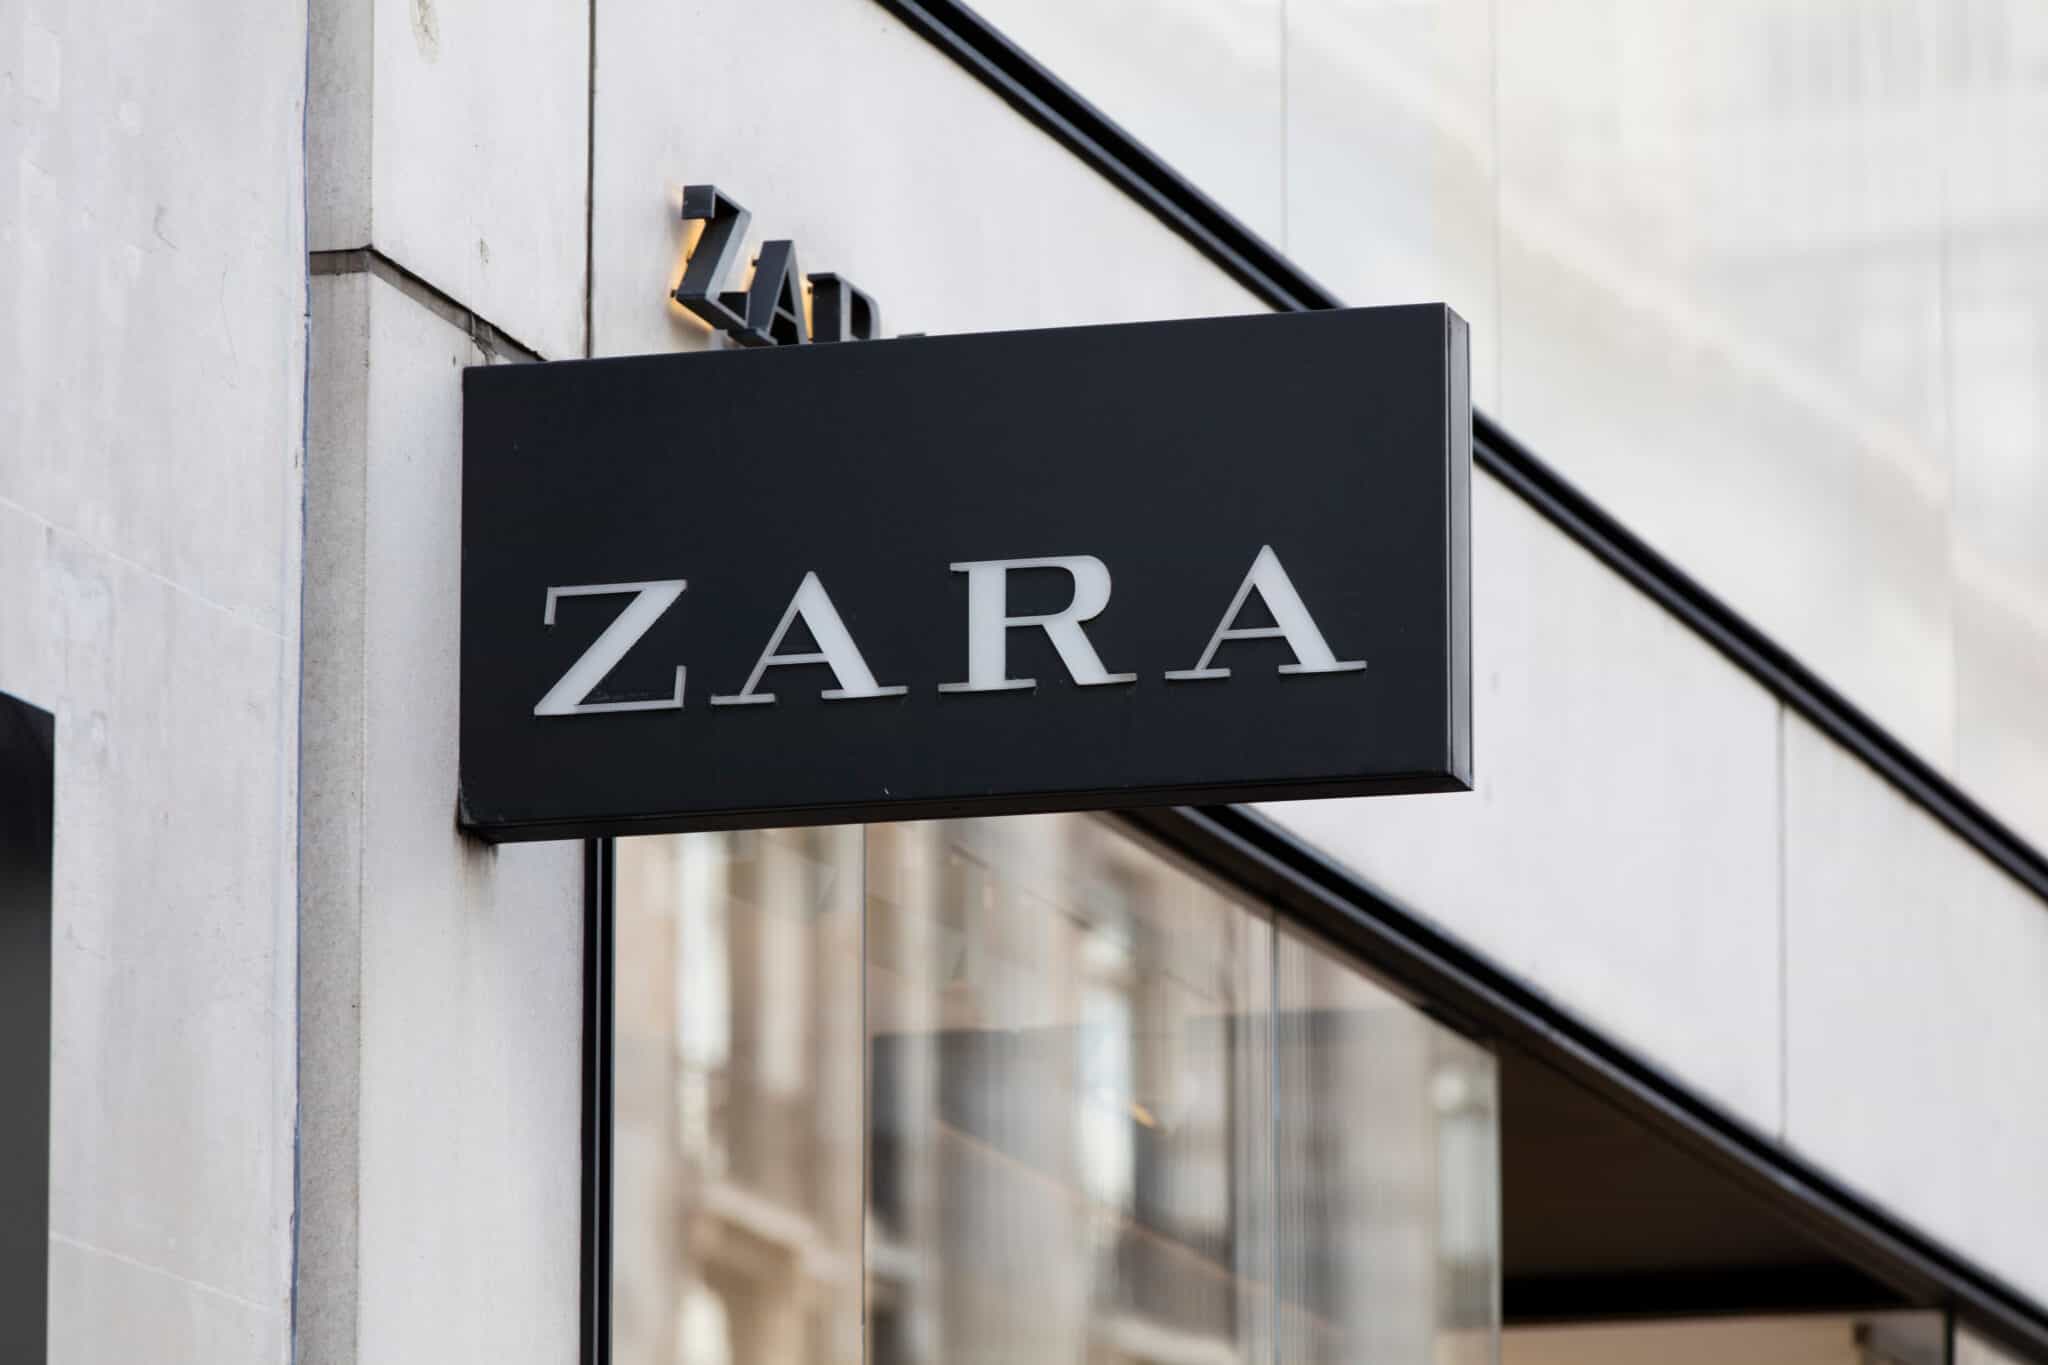 Focus: In the background, Inditex heiress sets tone for Zara revamp